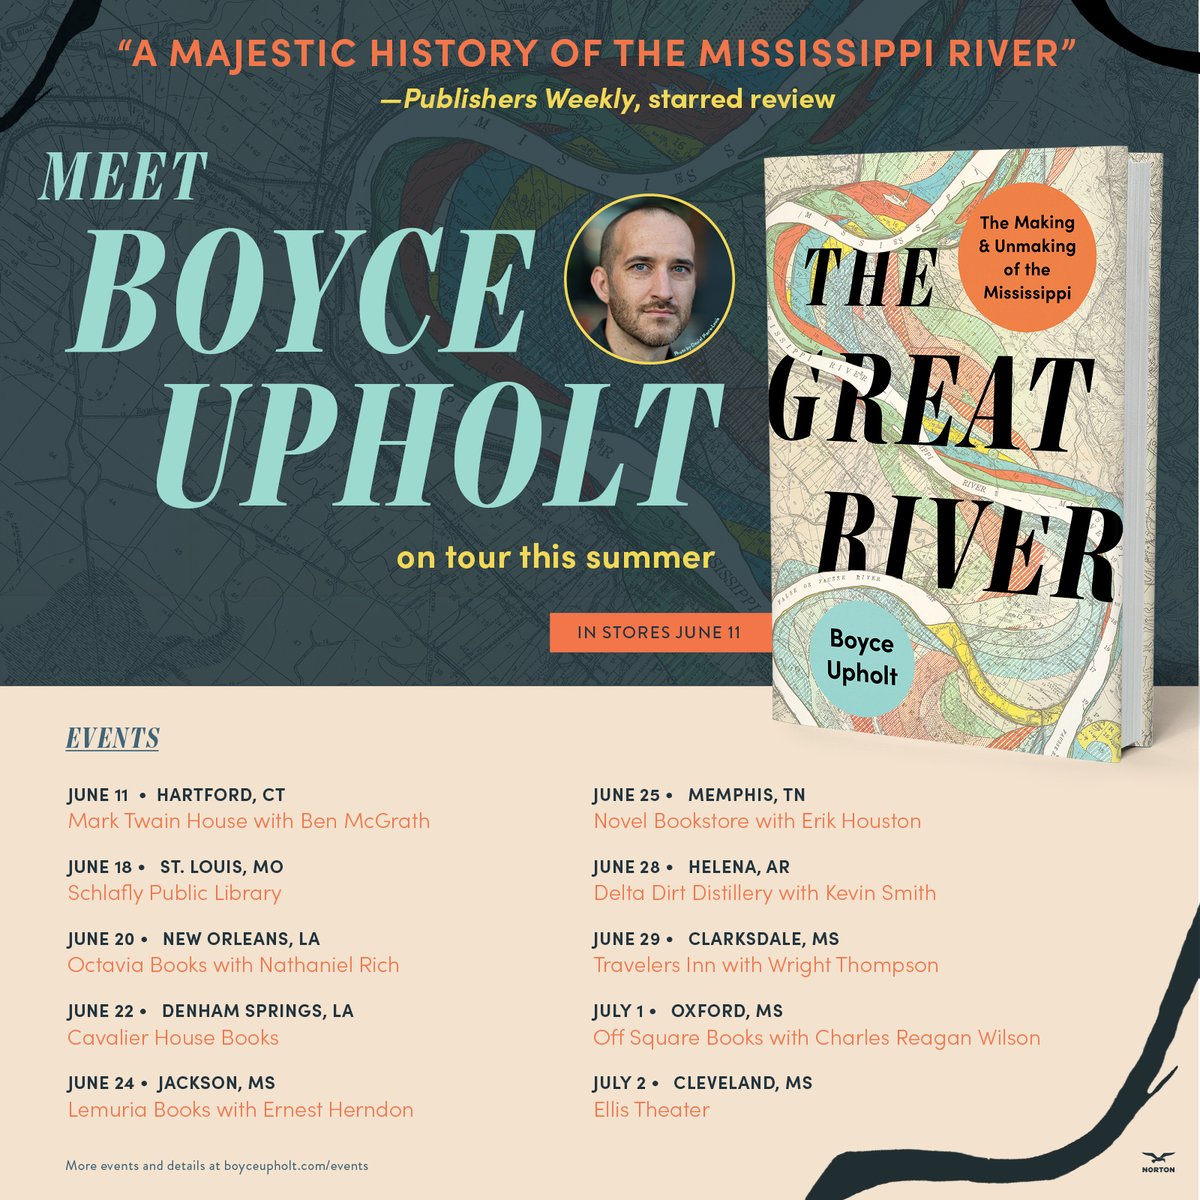 Thank you @TwainHouse, @octaviabooks, @LemuriaBooks, @STLpubLibrary, @novelmemphis, @SquareBooks and others for hosting @BoyceUpholt on tour for THE GREAT RIVER this summer...